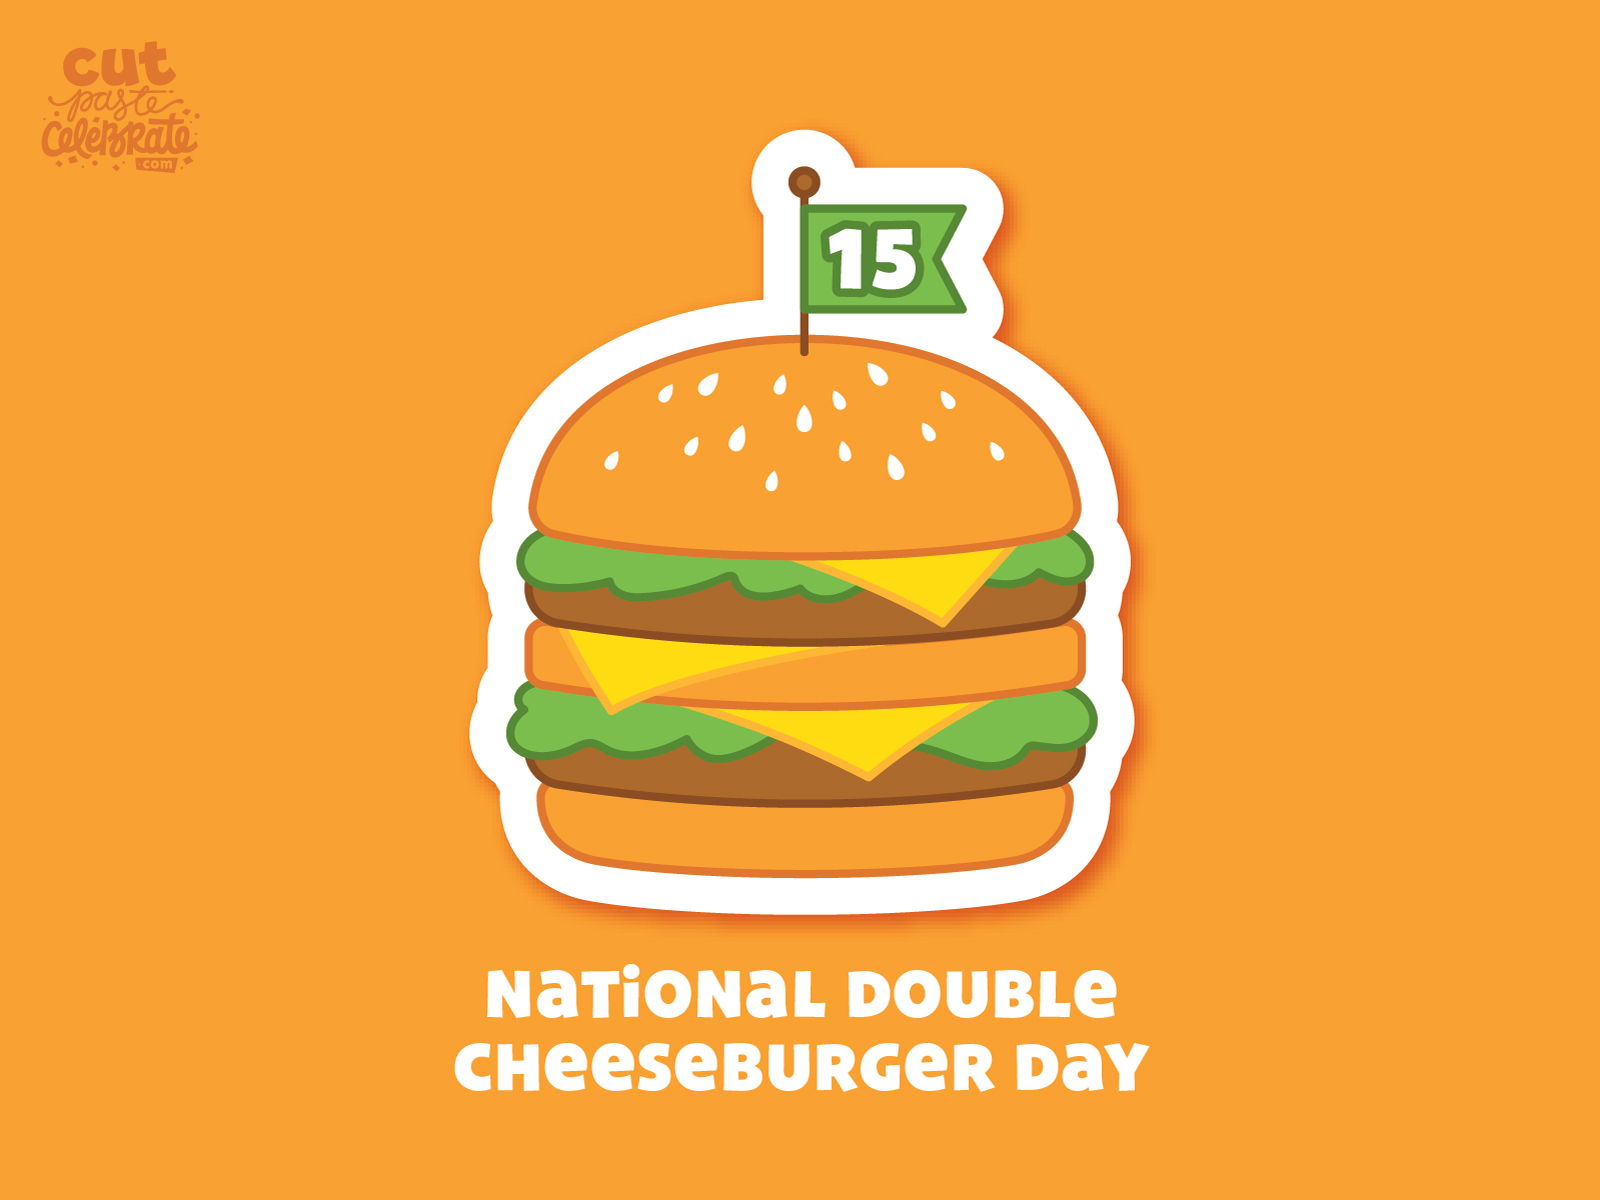 September 15 National Double Cheeseburger Day by Curt R. Jensen on